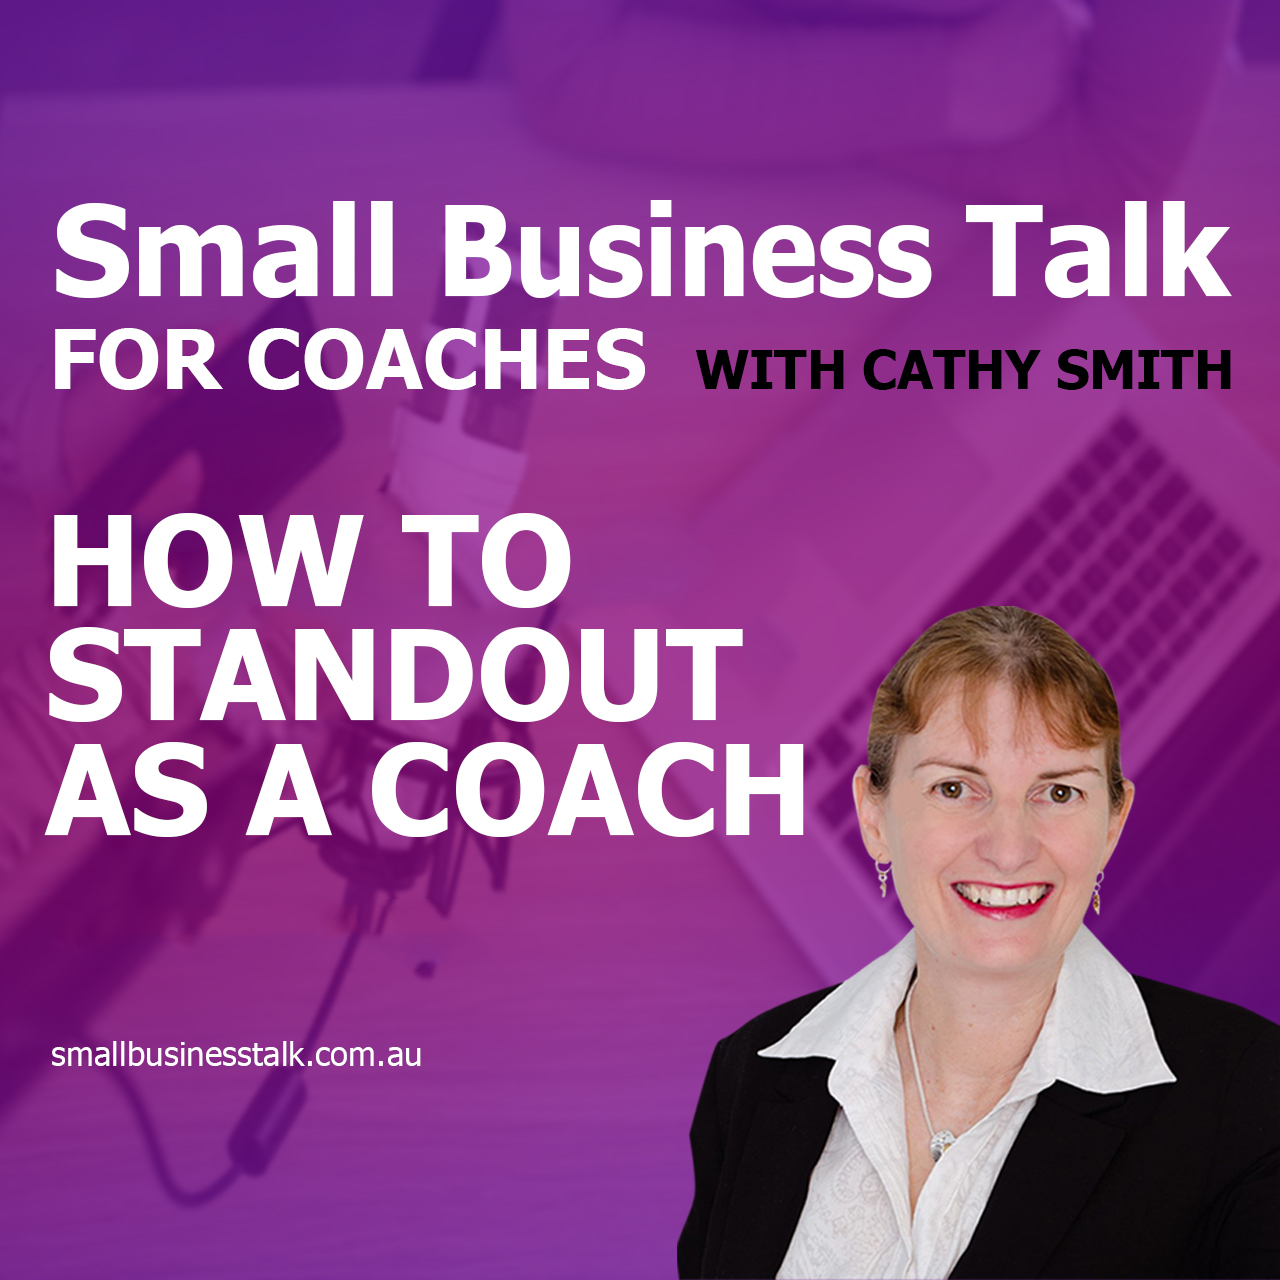 How to Stand Out as a Coach